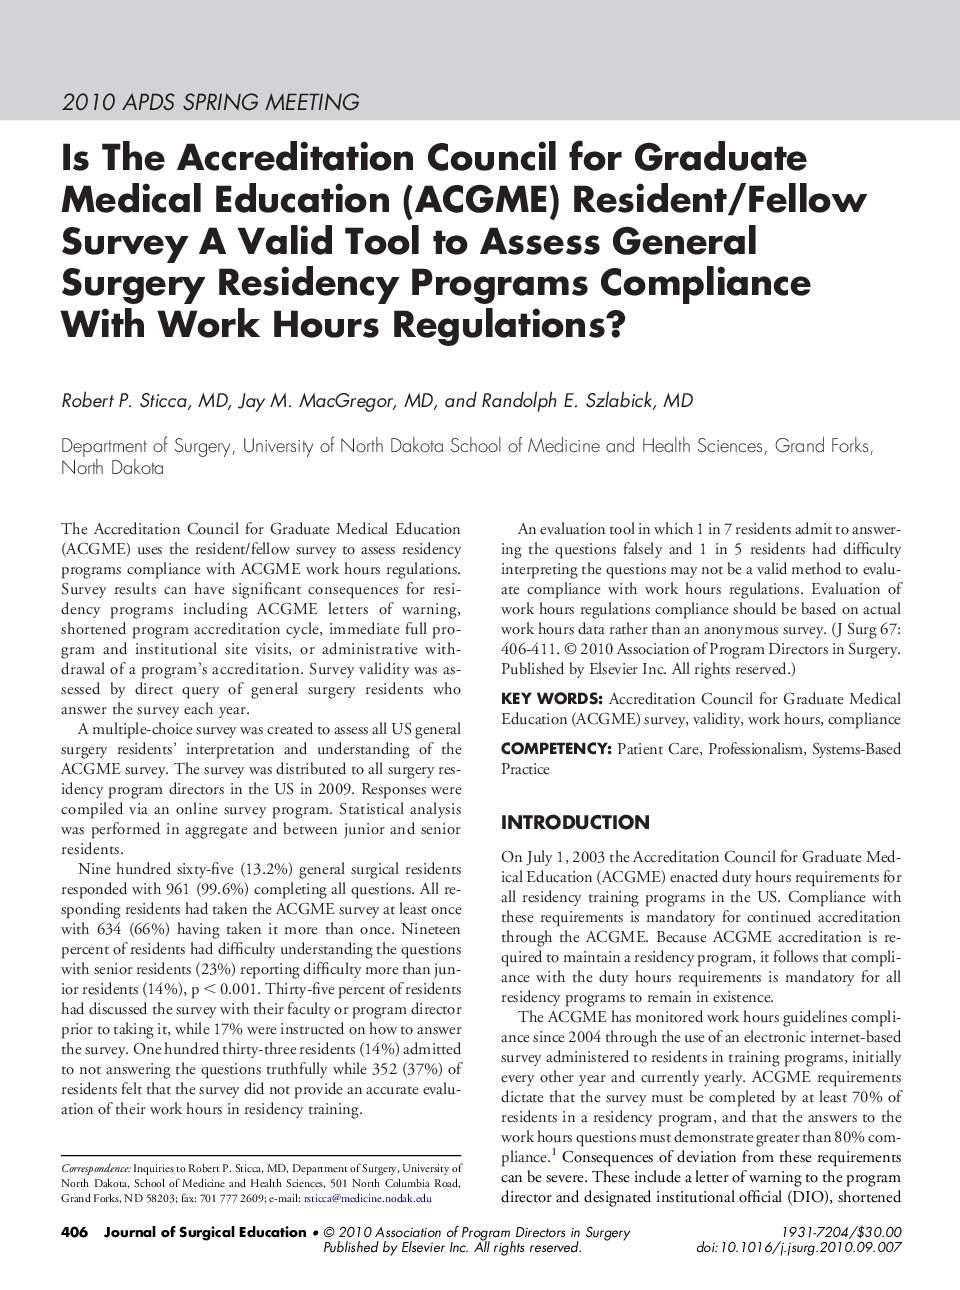 Is The Accreditation Council for Graduate Medical Education (ACGME) Resident/Fellow Survey A Valid Tool to Assess General Surgery Residency Programs Compliance With Work Hours Regulations?